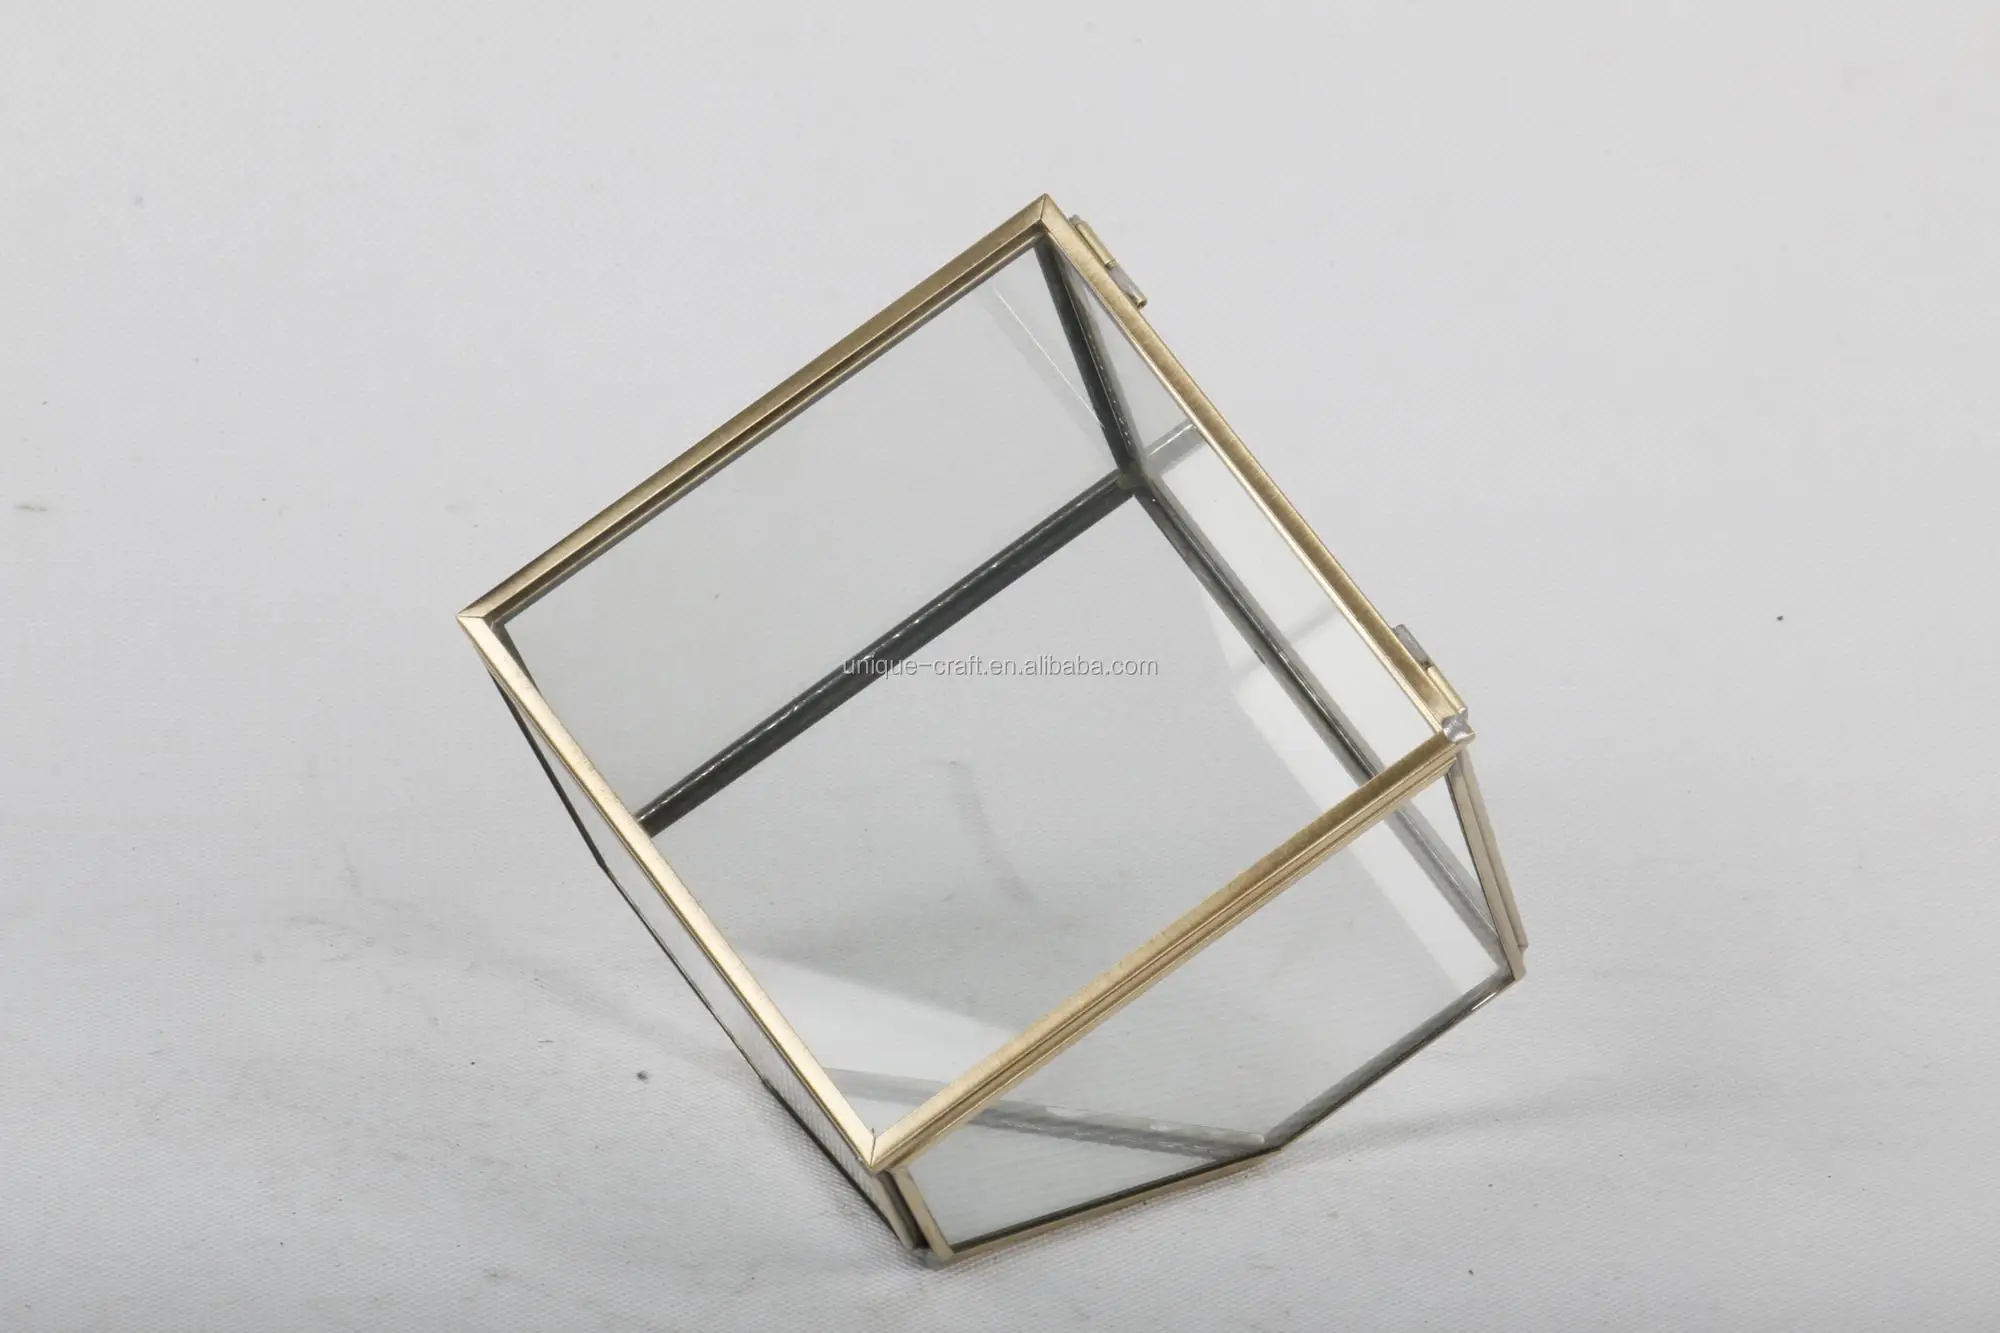 4 Inch Antique Brass Copper Small Glass Geometric Cube Terrarium Supplies with Hinged Door